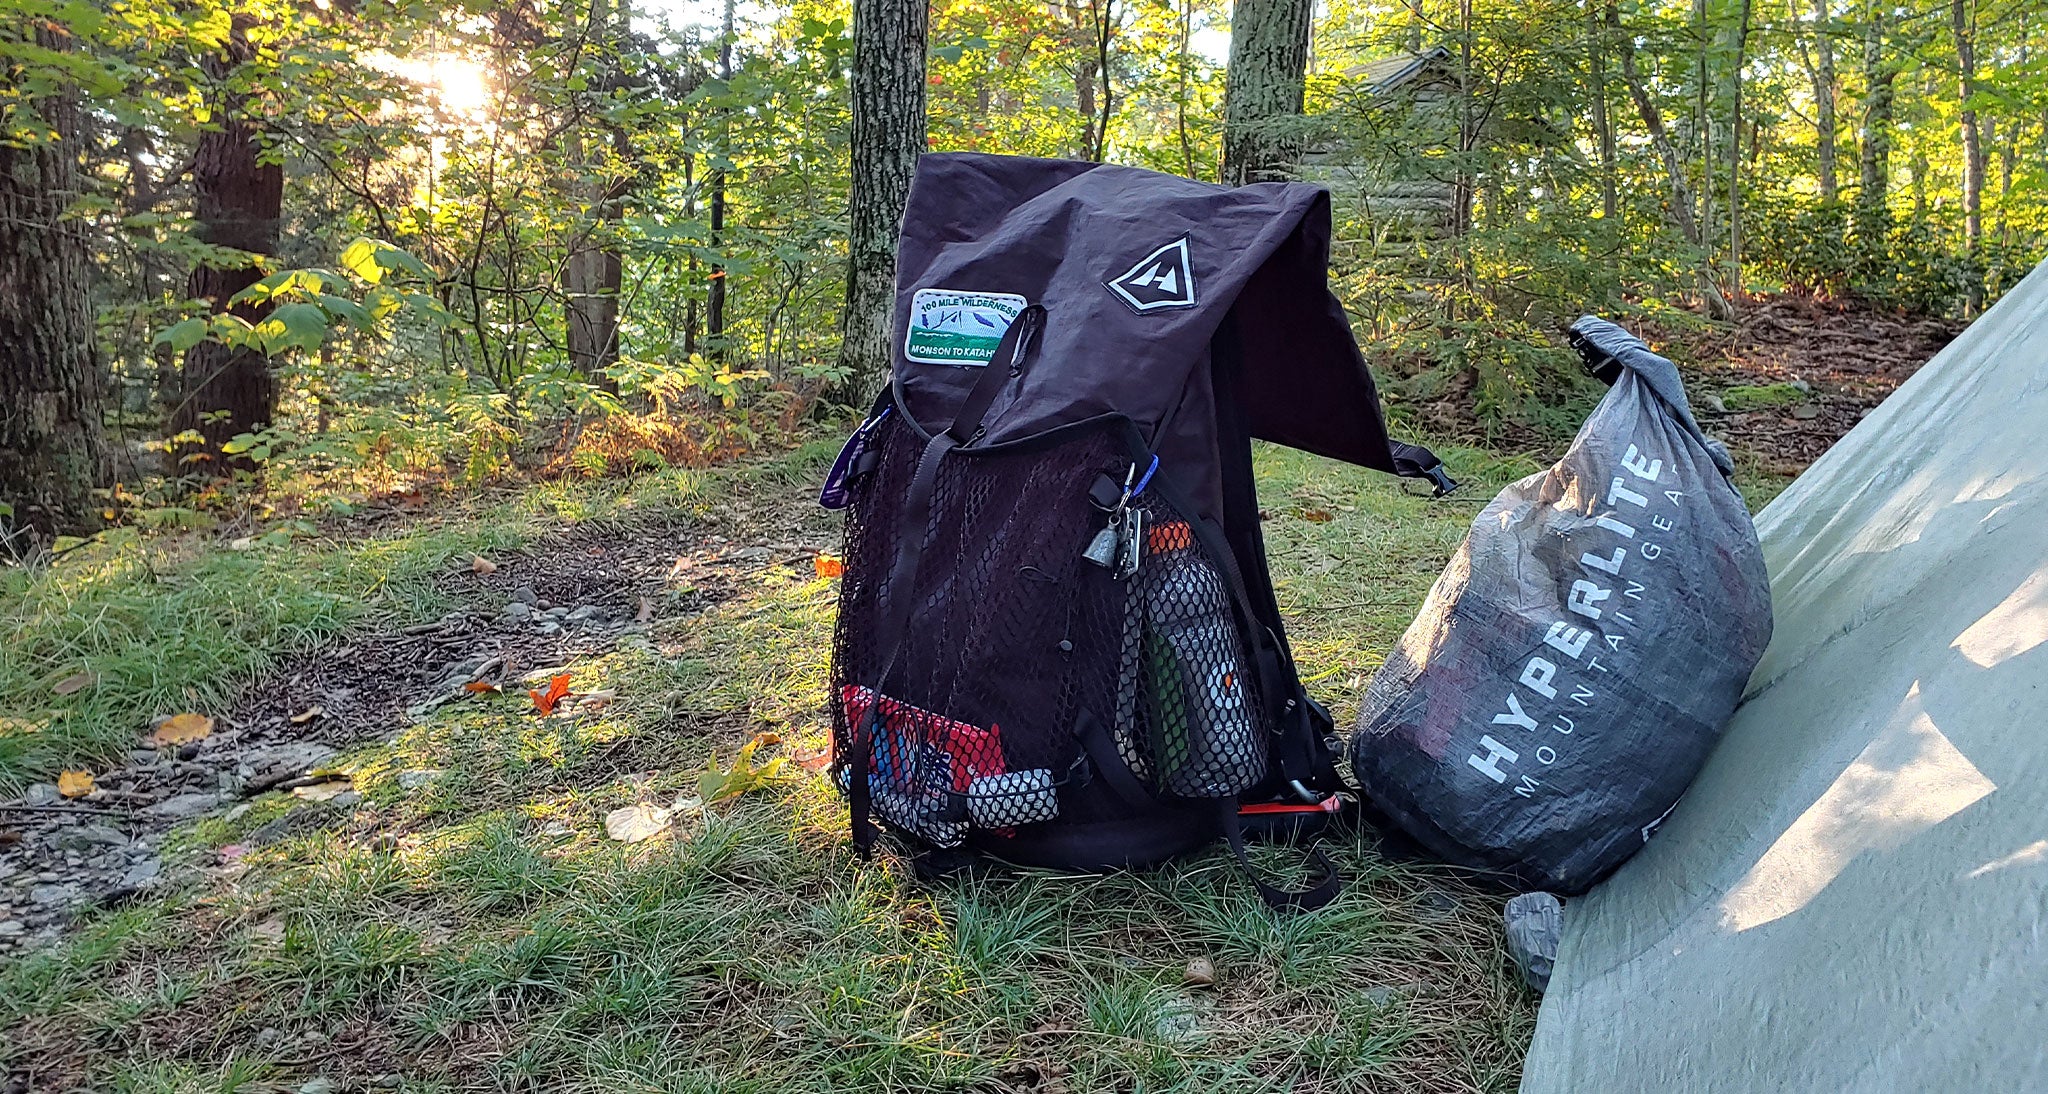 Ultralight pack at camp